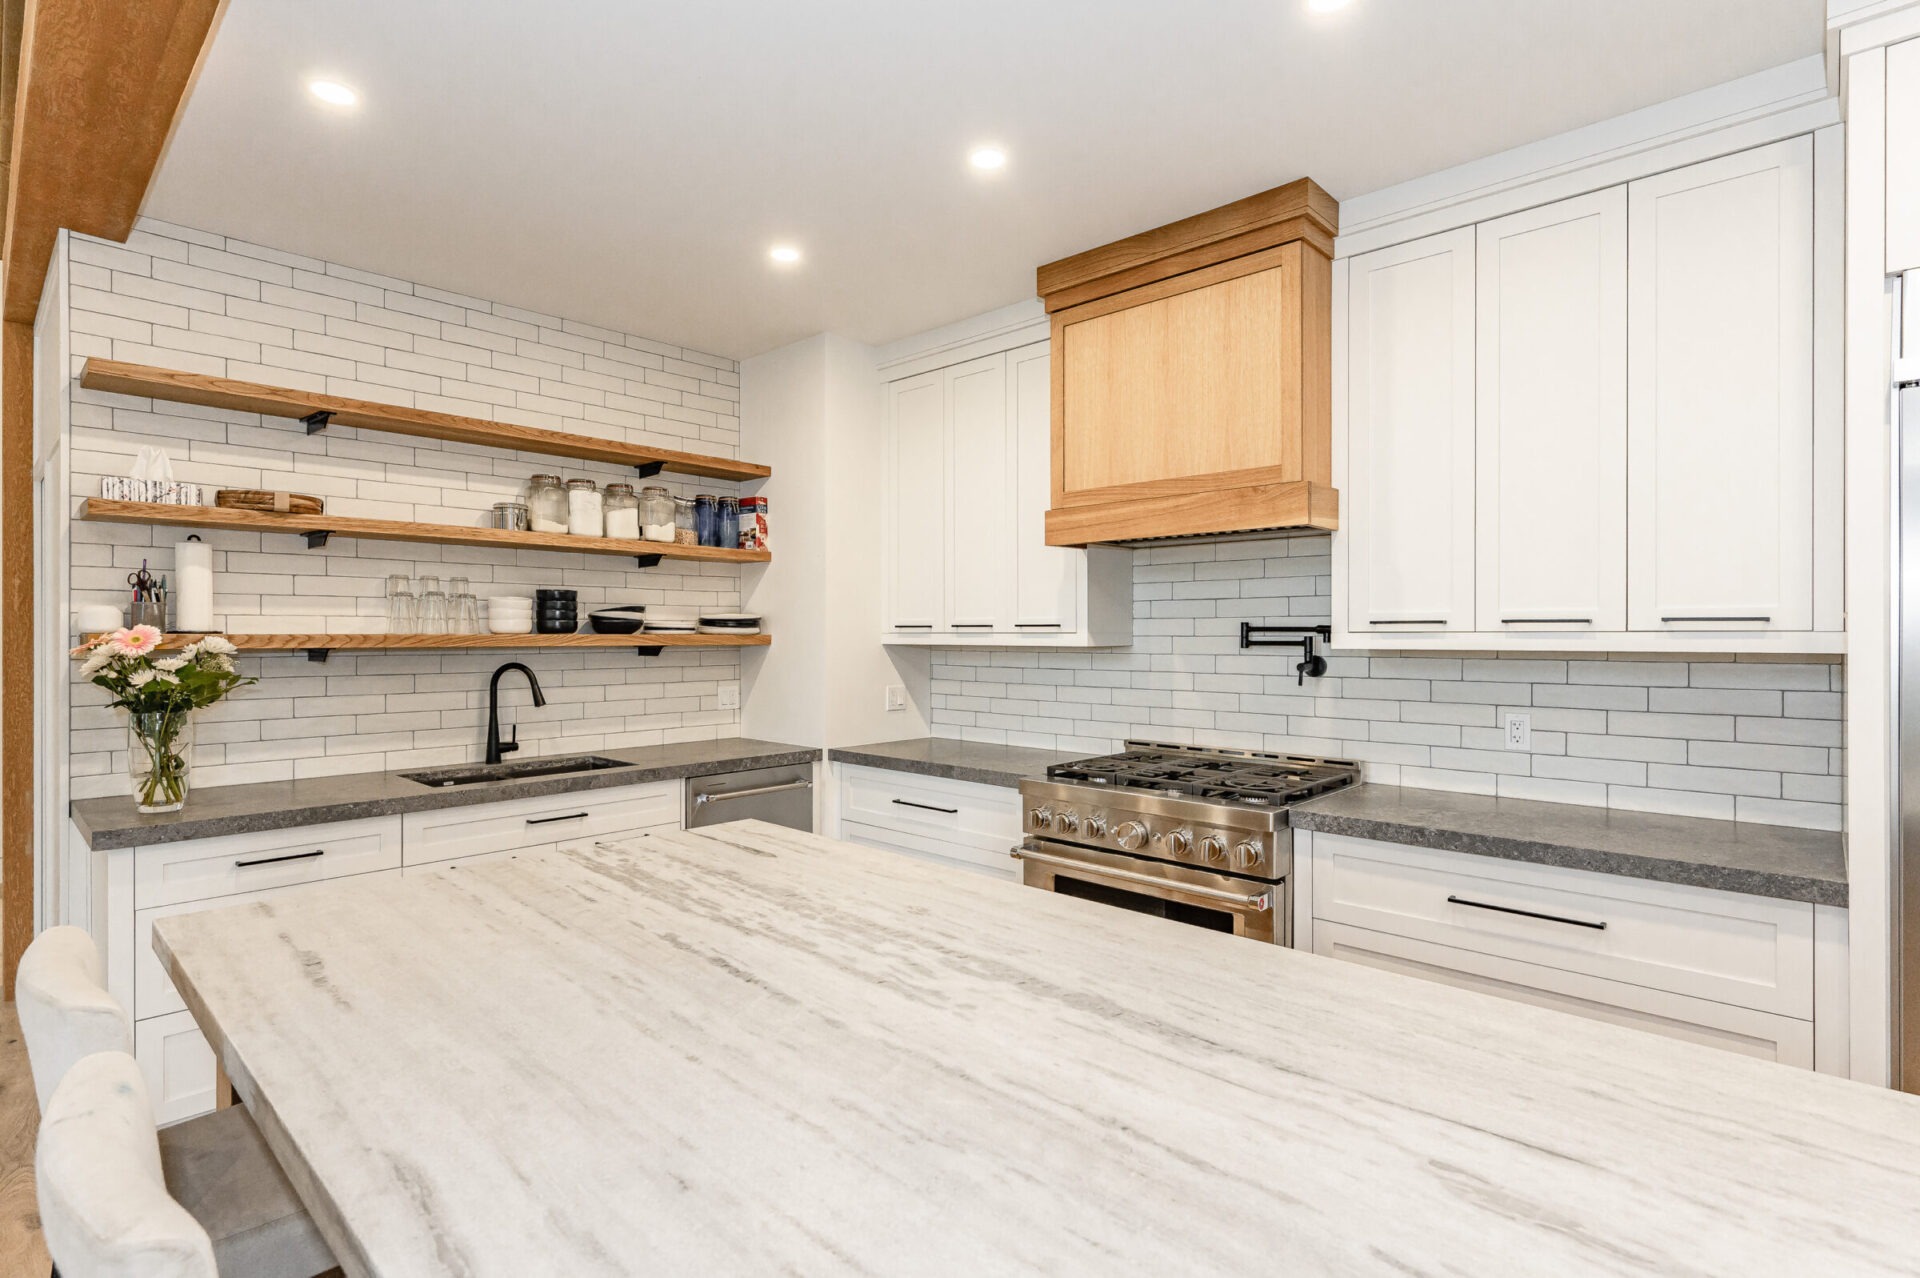 Modern kitchen interior with white cabinetry, subway tile backsplash, wooden shelves, stainless steel stove, and marble countertops with natural light.